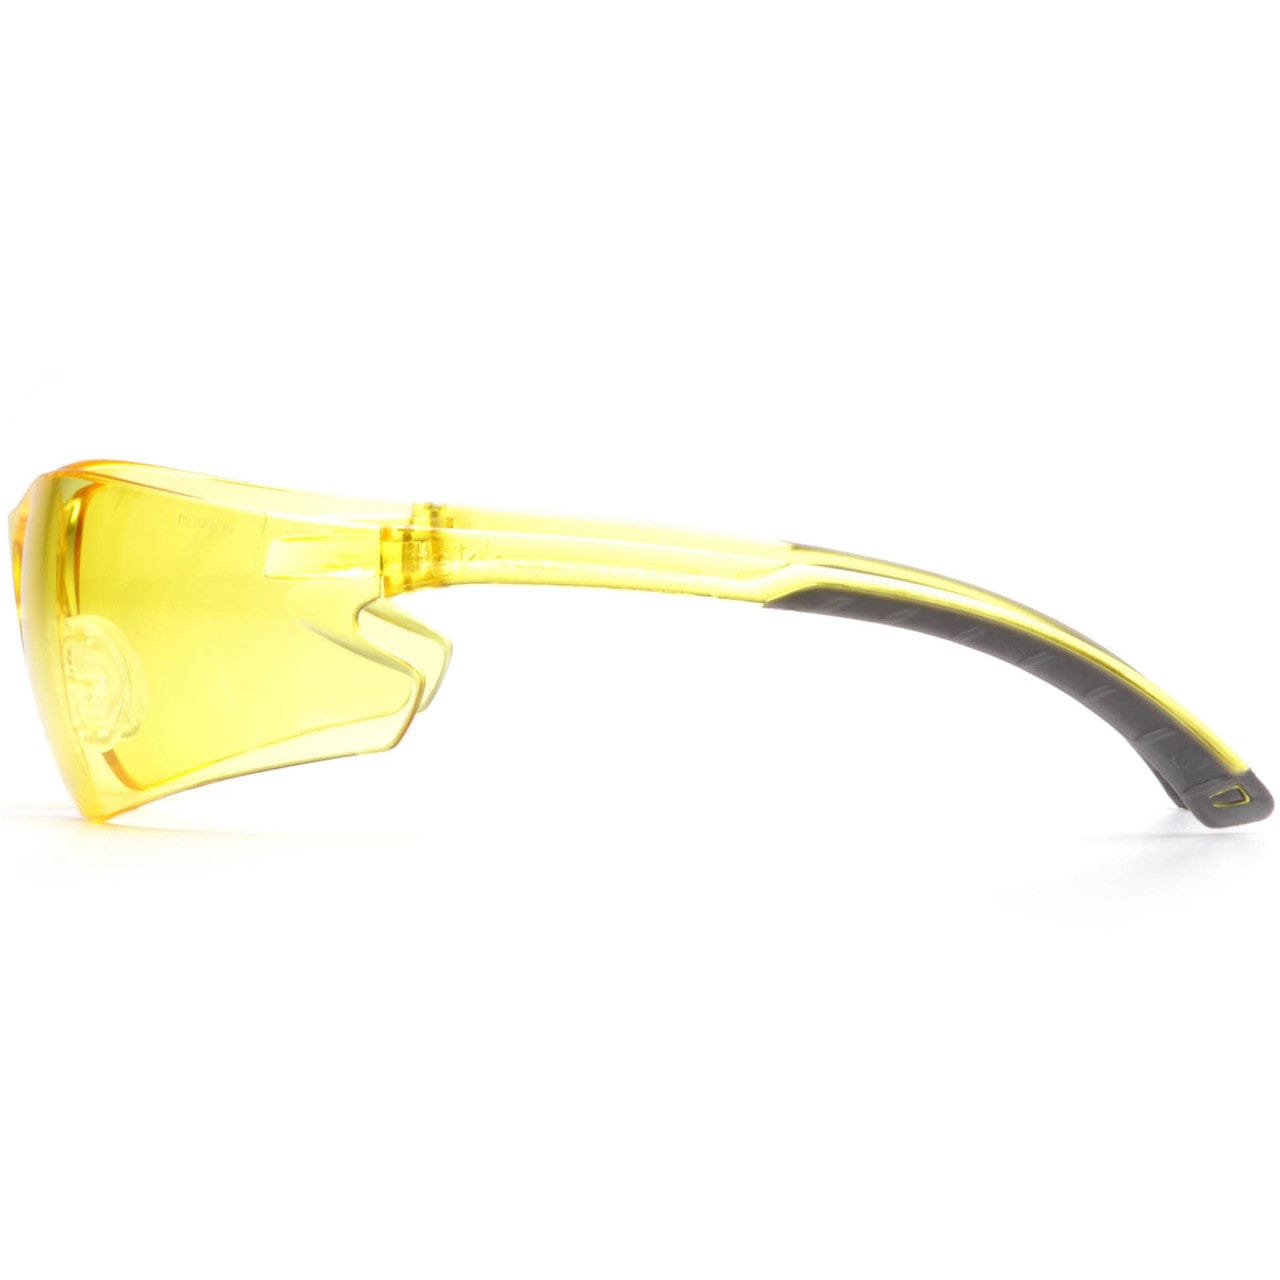 Pyramex Itek Safety Glasses with Amber Lens S5830S Side View